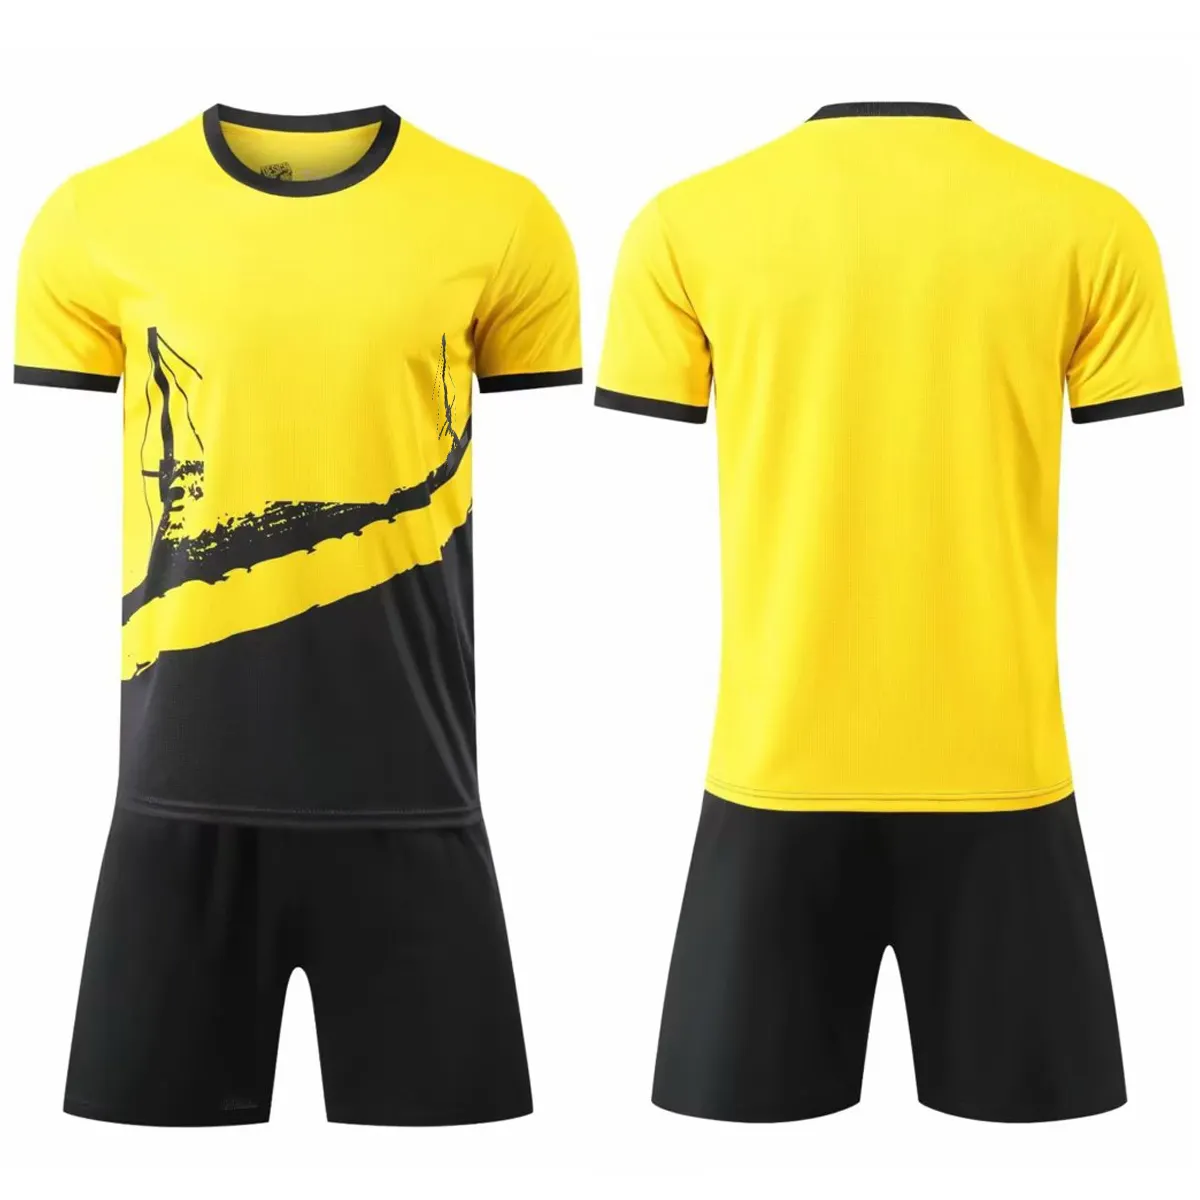 23 jersey black and yellow maillot dortmund kit football personnalisable for kids mens soccer uniforms soccer wear set with logo